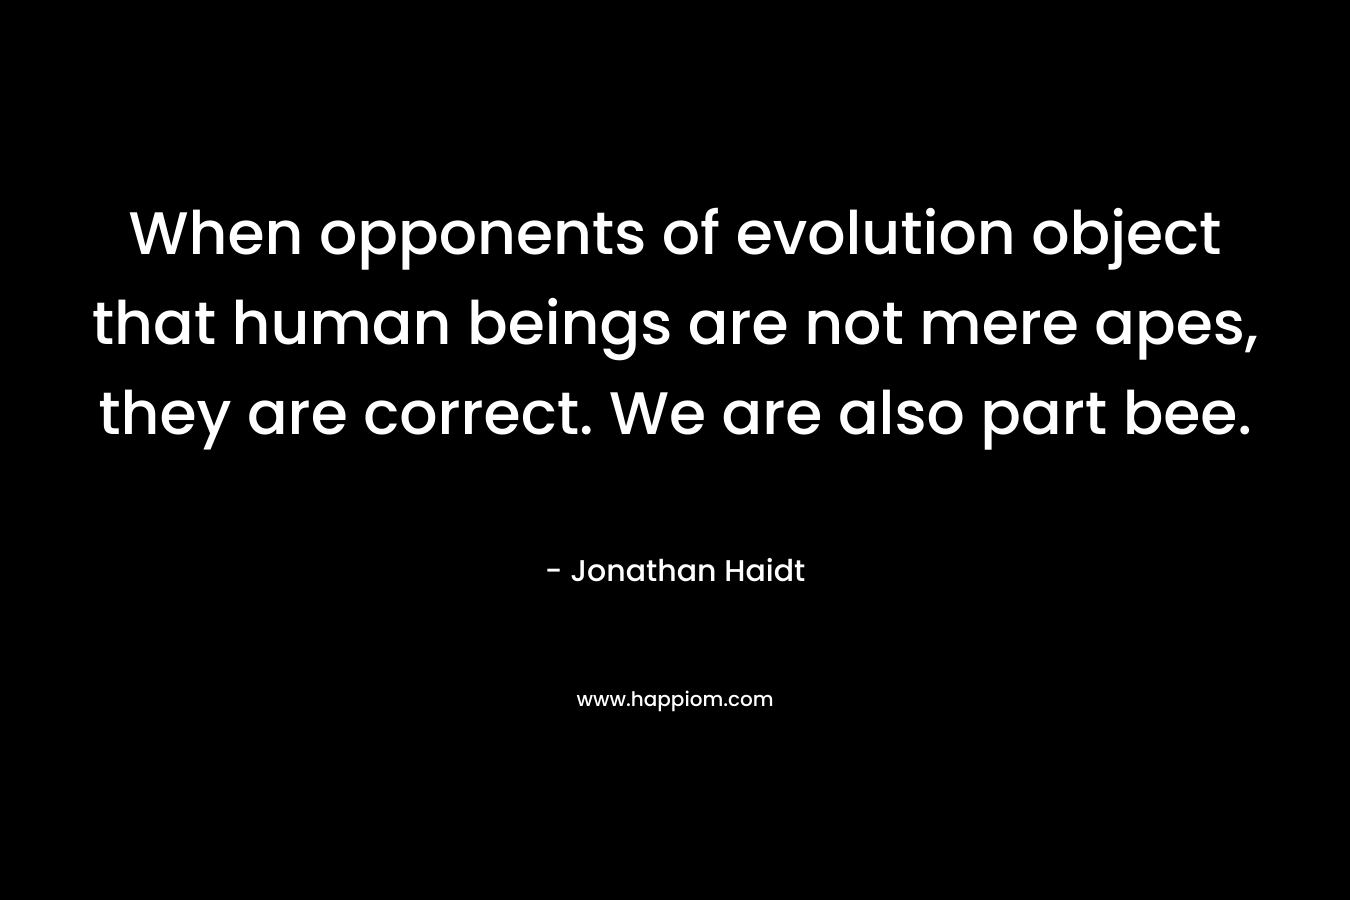 When opponents of evolution object that human beings are not mere apes, they are correct. We are also part bee.